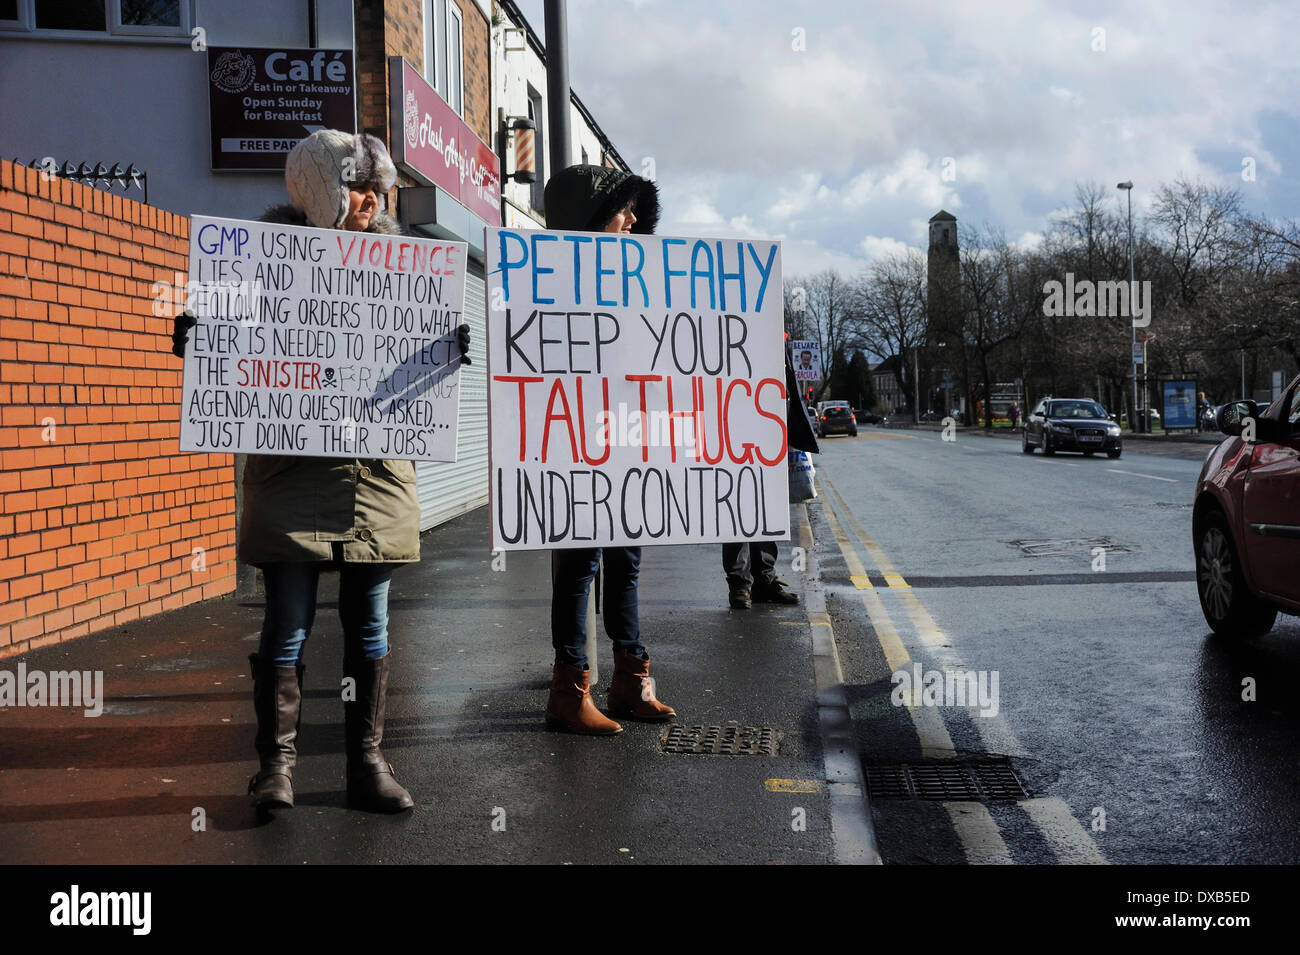 Swinton, Salford, Manchester, UK . 22nd March 2014. Anti-fracking campaigners protest outside Swinton police station, Salford, Manchester. Two ladies standing opposite the police staion displaying protest signs from passing motorists to see. Both signs infer that the Greater Manchester Police behave violently. Credit:  Dave Ellison/Alamy Live News Stock Photo